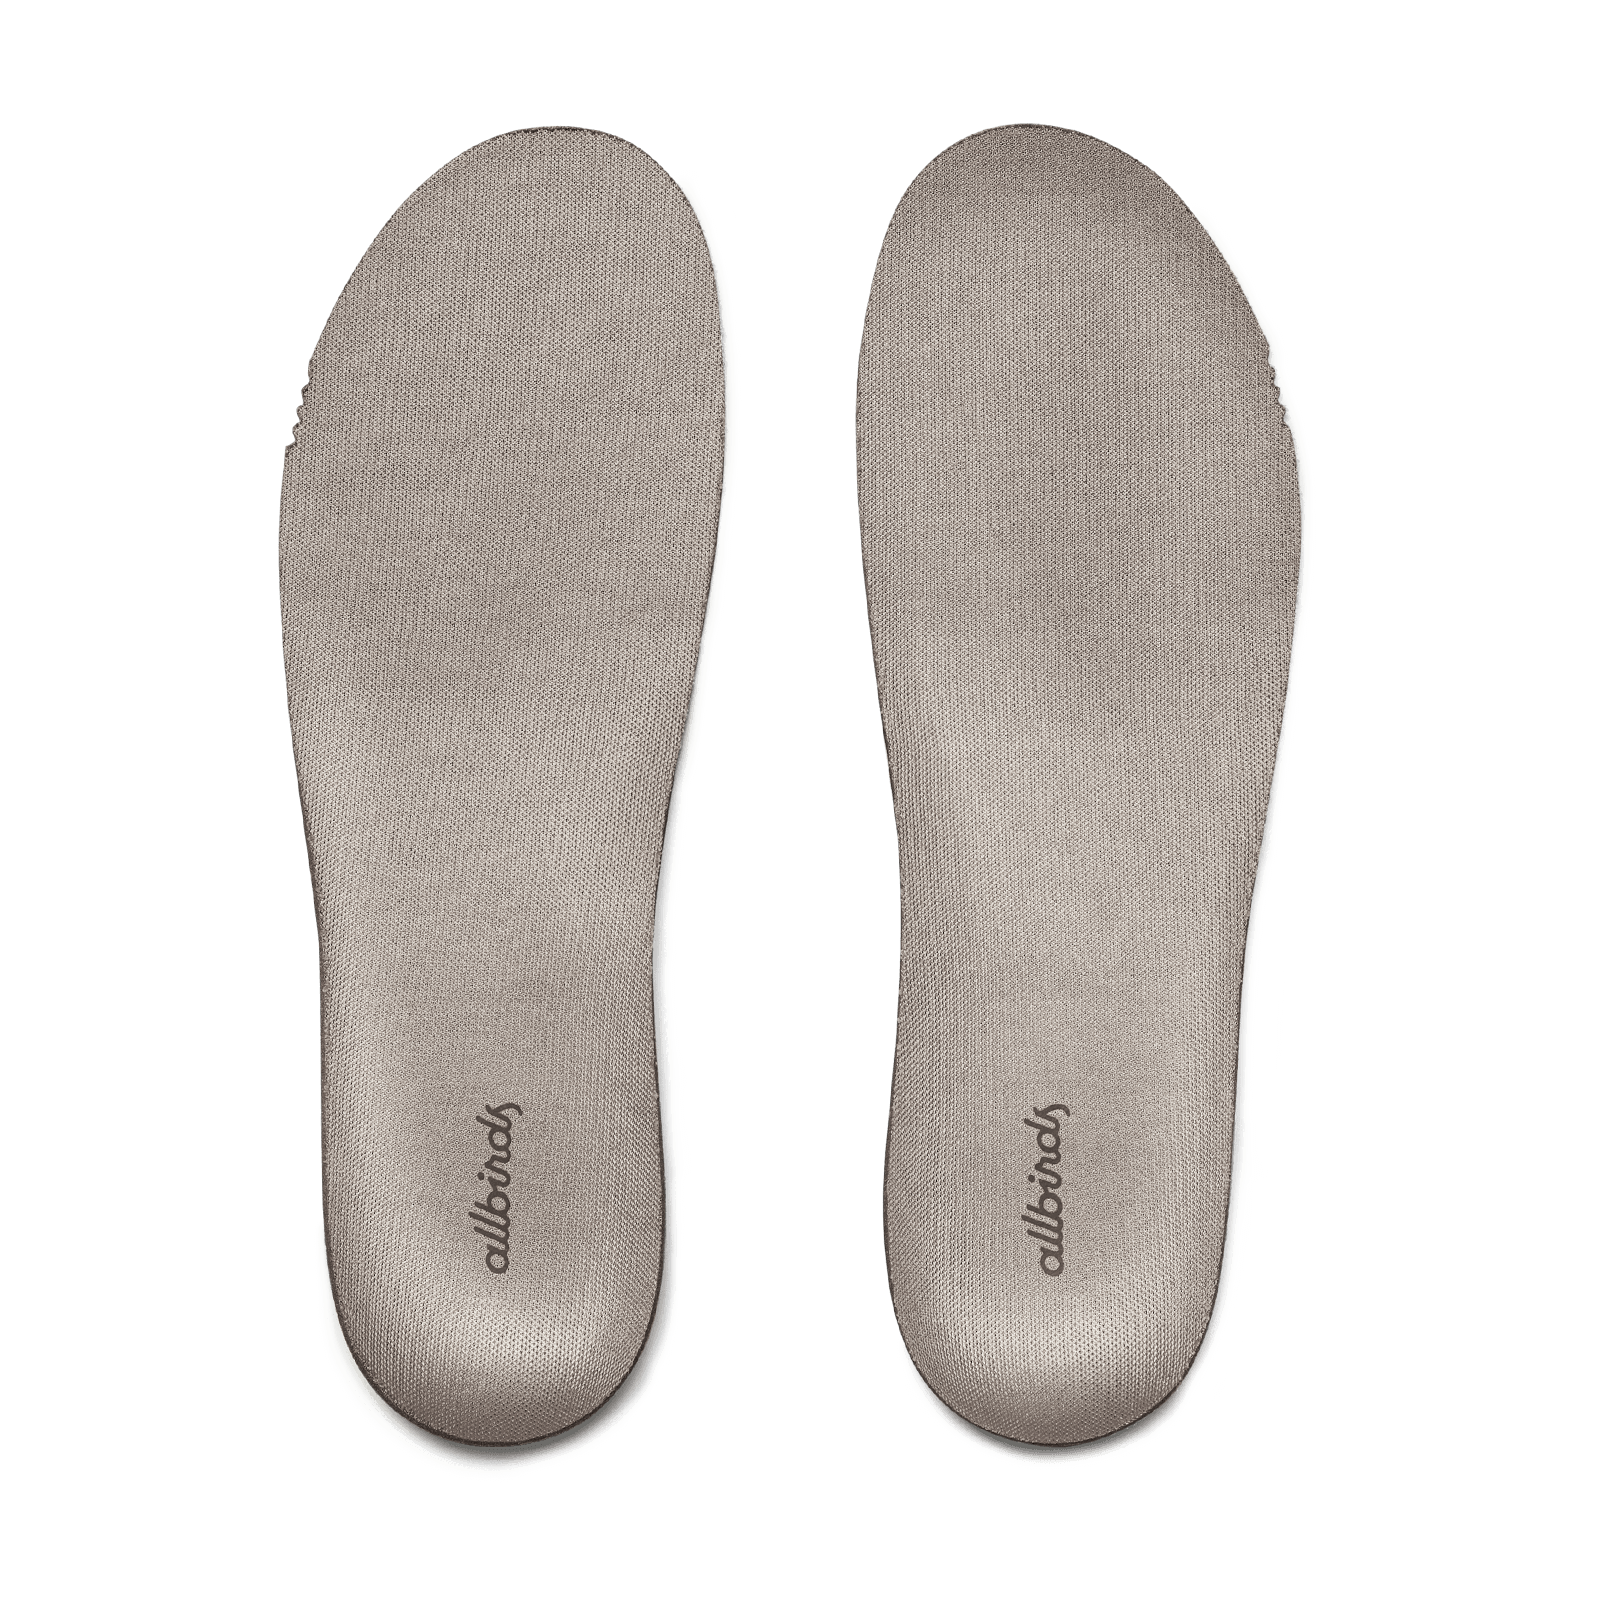 Men's Dasher Insoles - Natural Charcoal